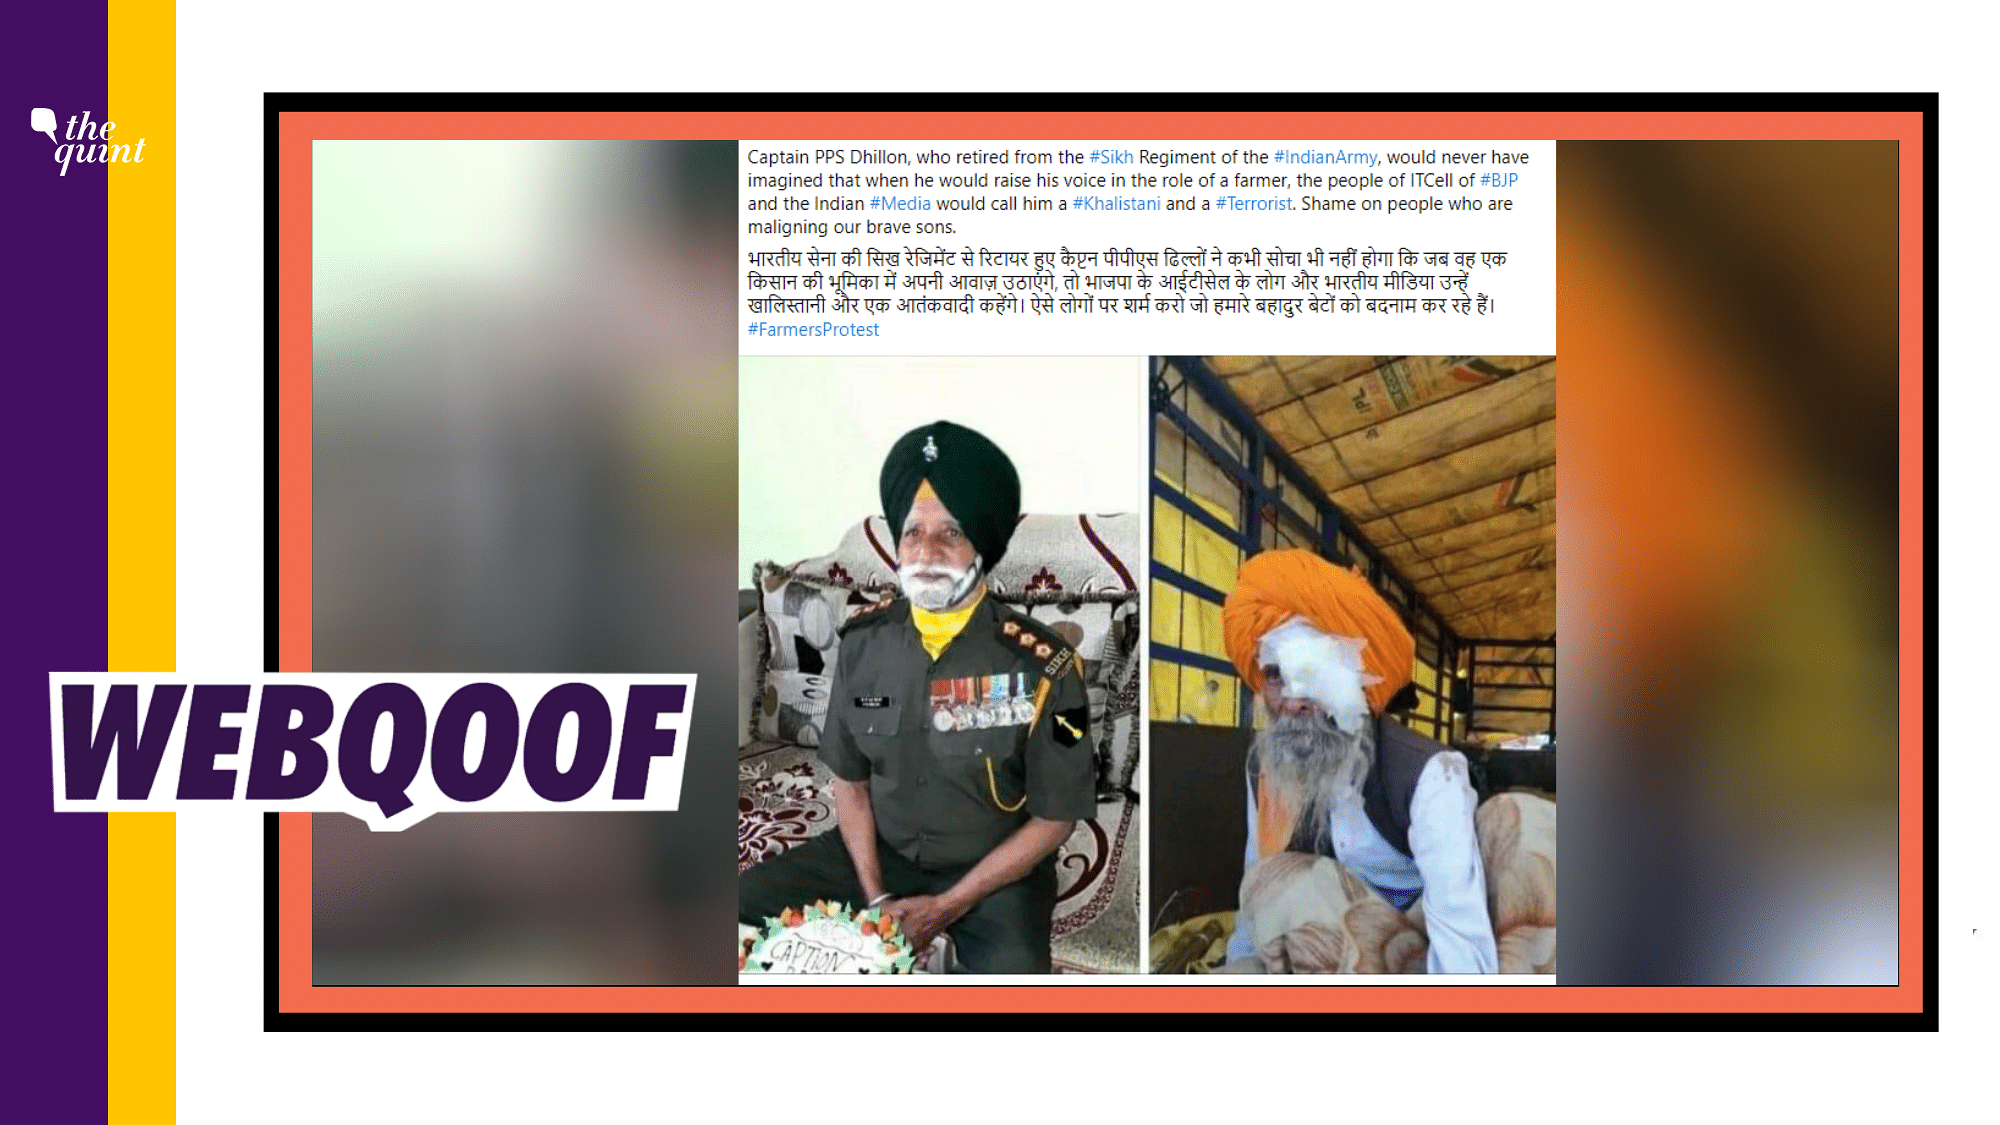 Sukhwinder Singh, son of the retired captain in the viral image, confirmed that the two men were not the same.